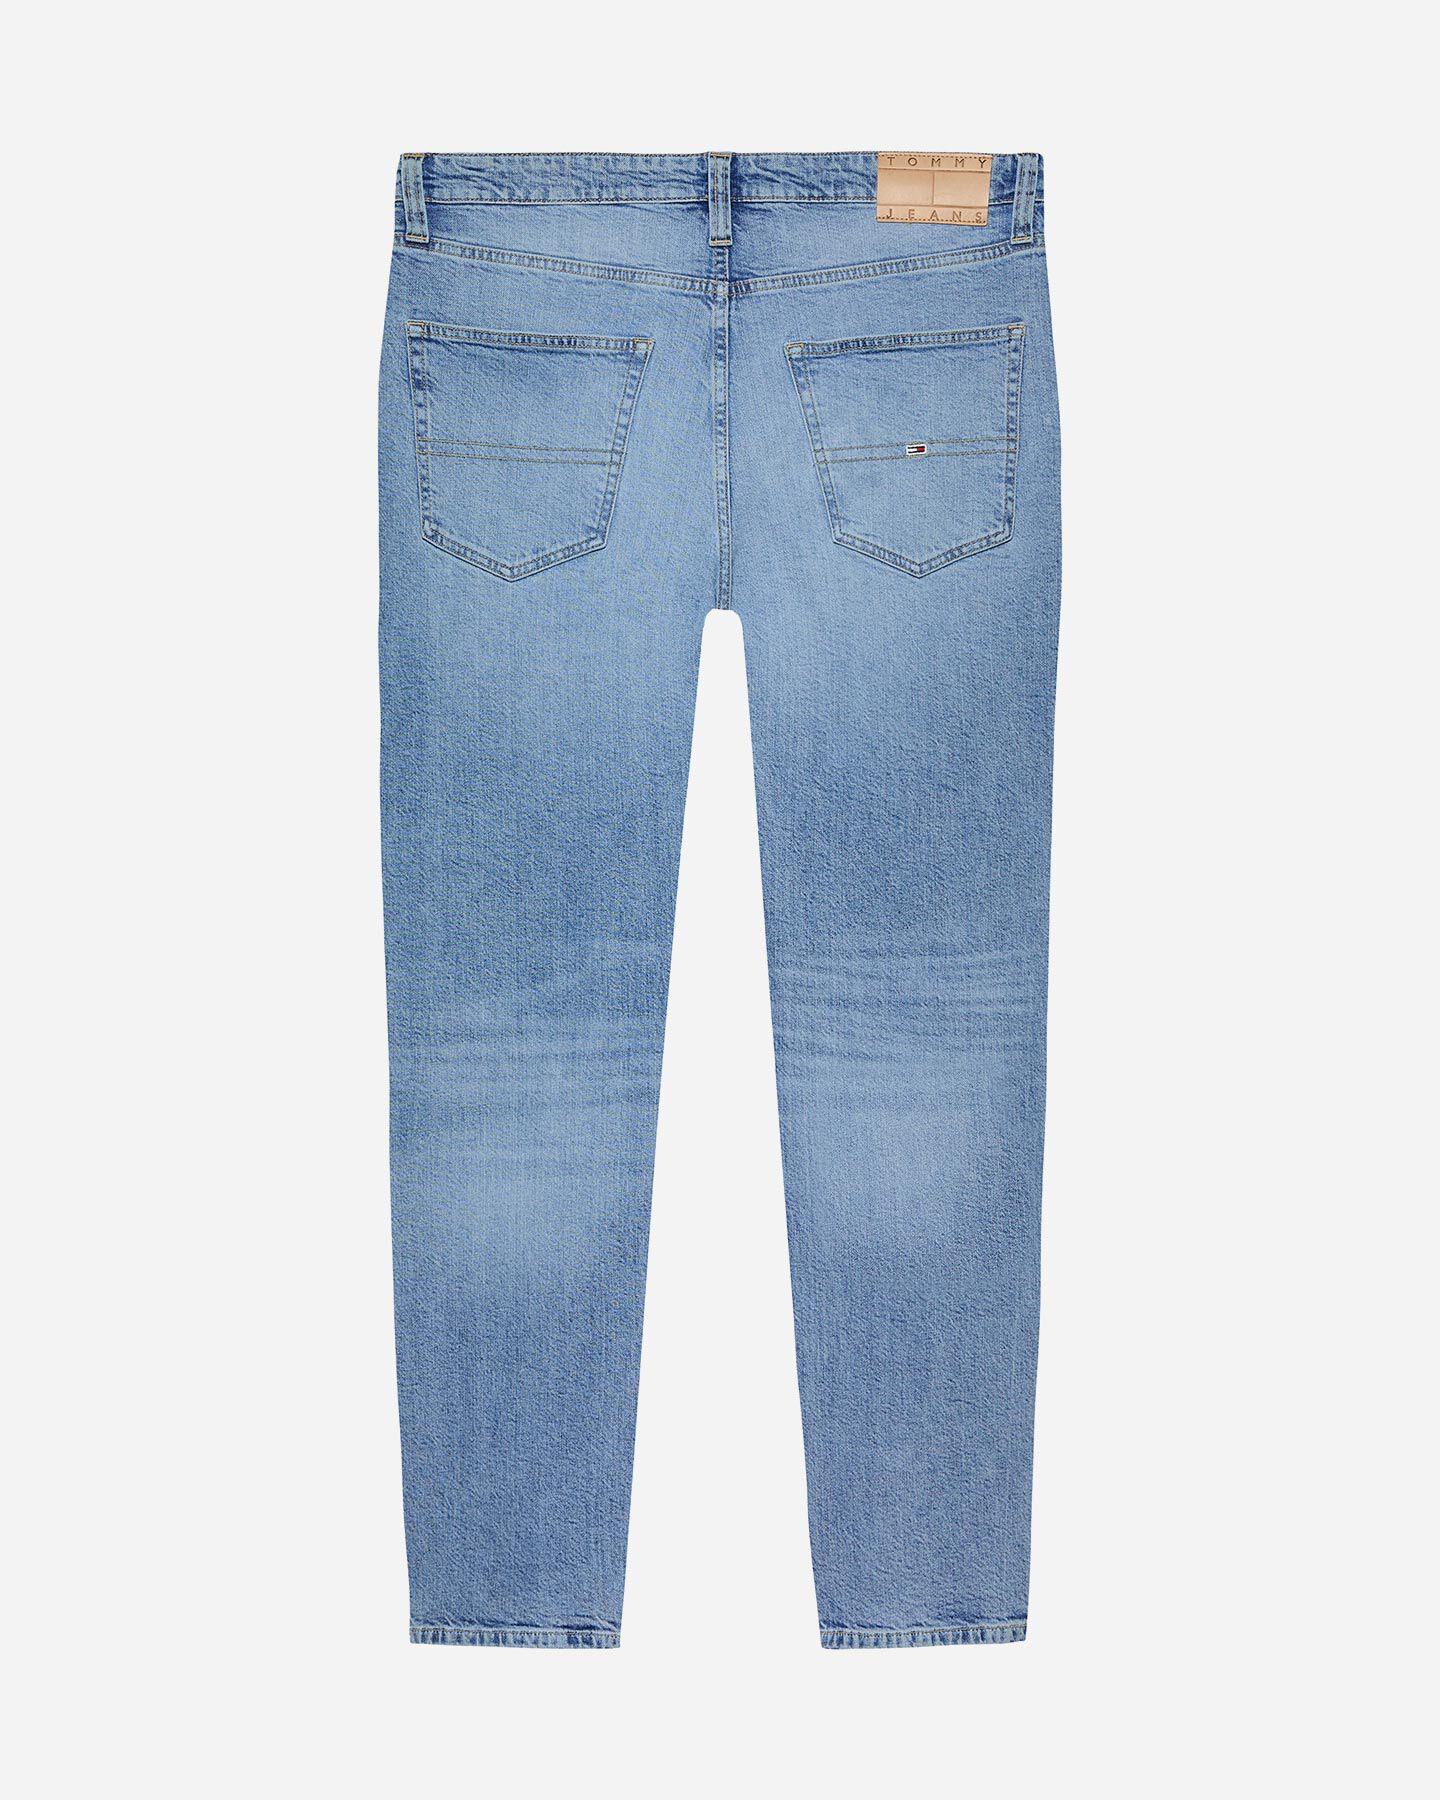  Jeans TOMMY HILFIGER DAD TAPERED M S5686197|UNI|32/33 scatto 1